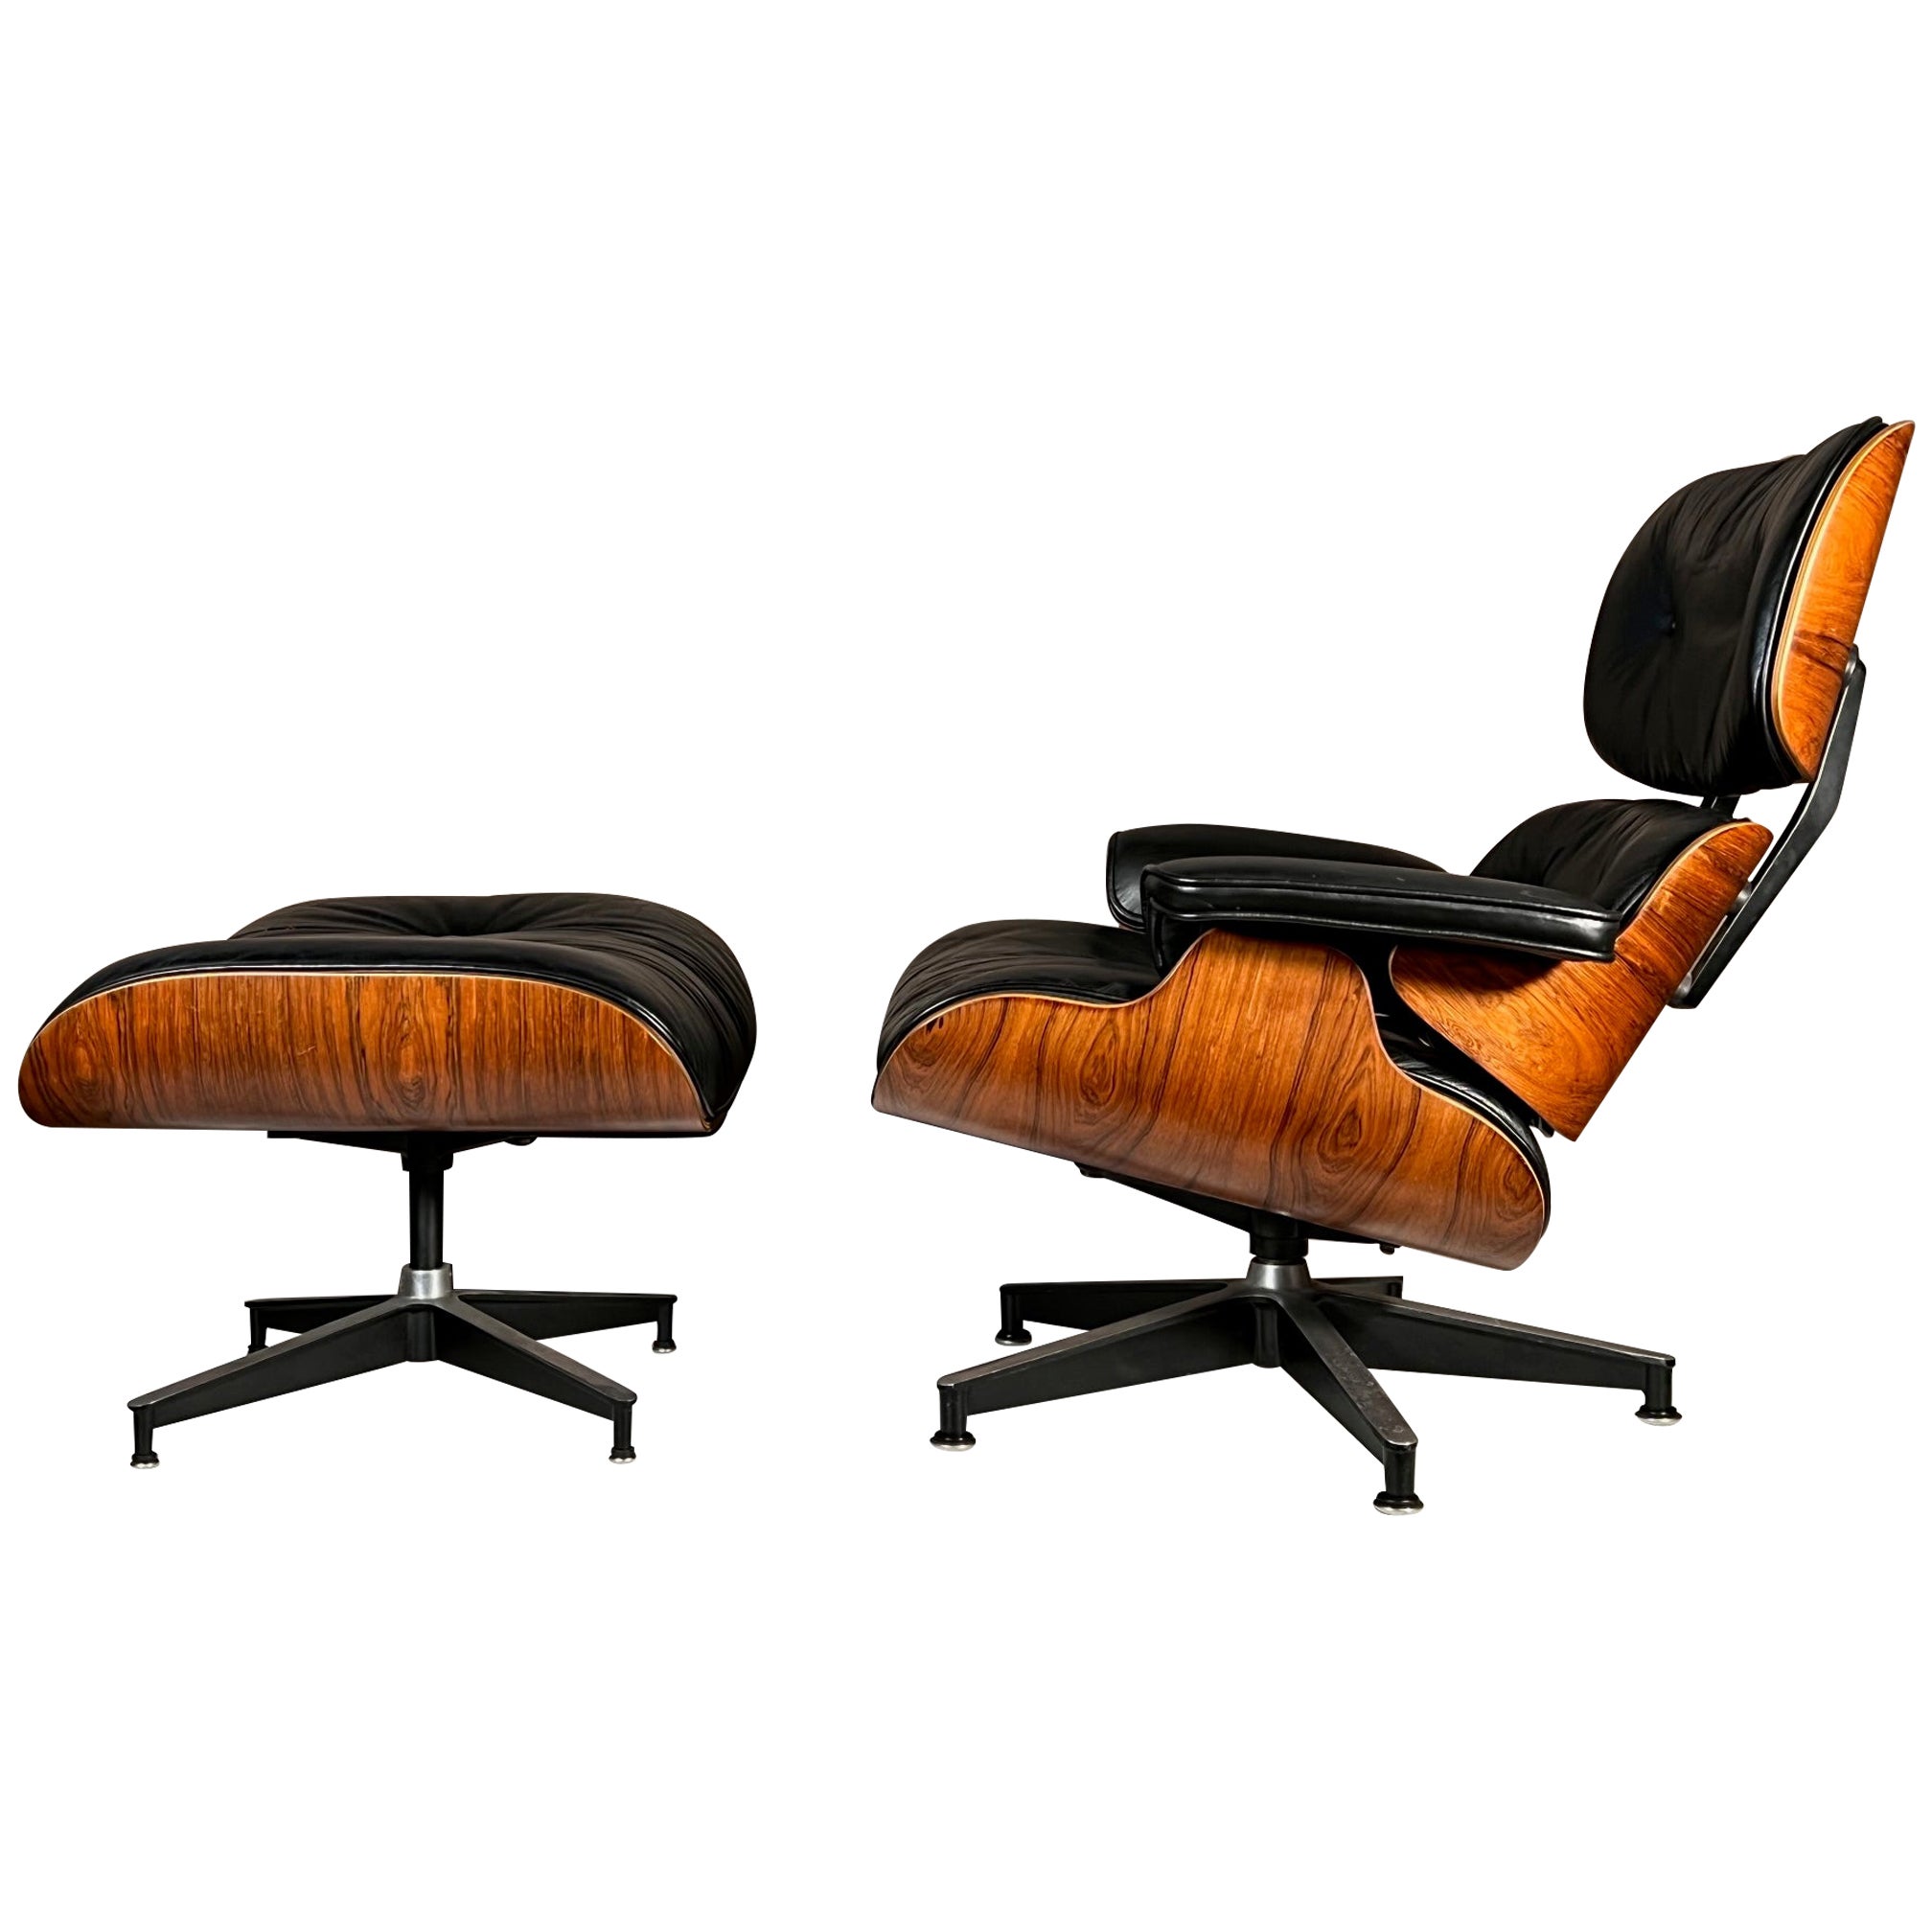 Charles Eames Lounge Chairs